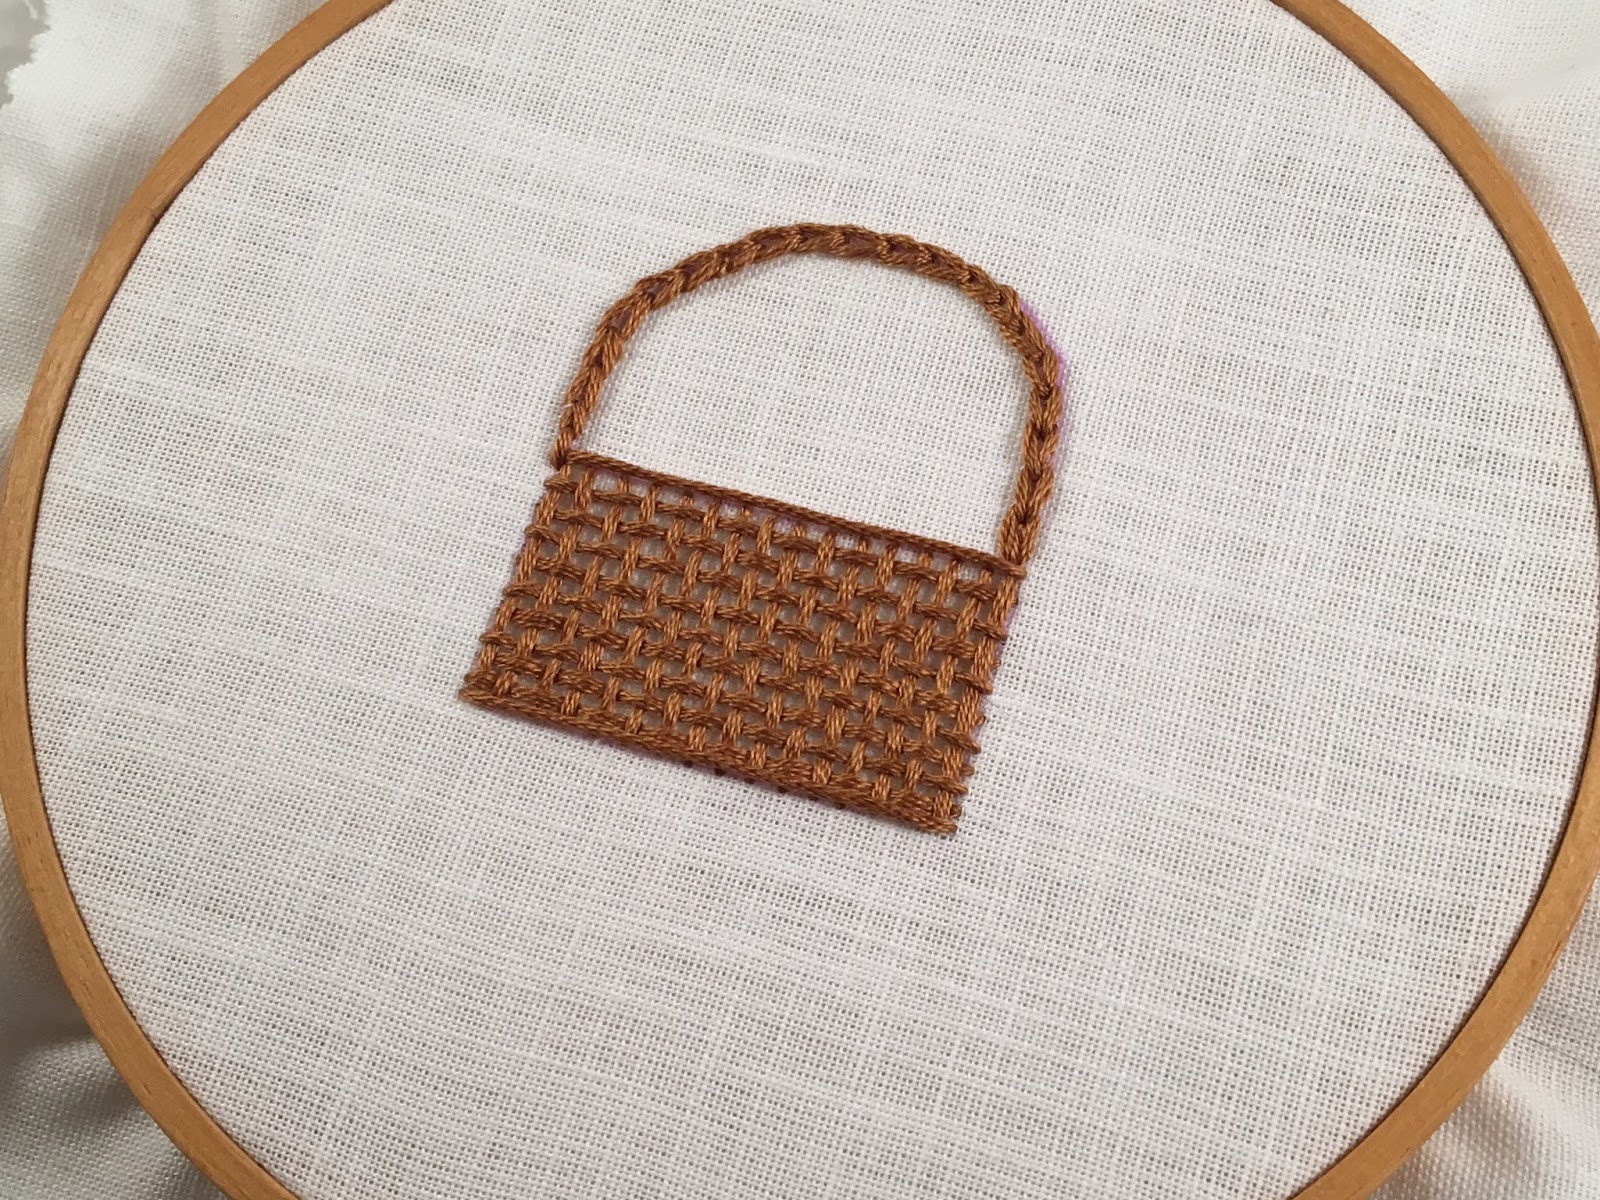 Woven Basket with flowers, a tutorial by Michelle for Mooshiestitch Monday on Feeling Stitchy